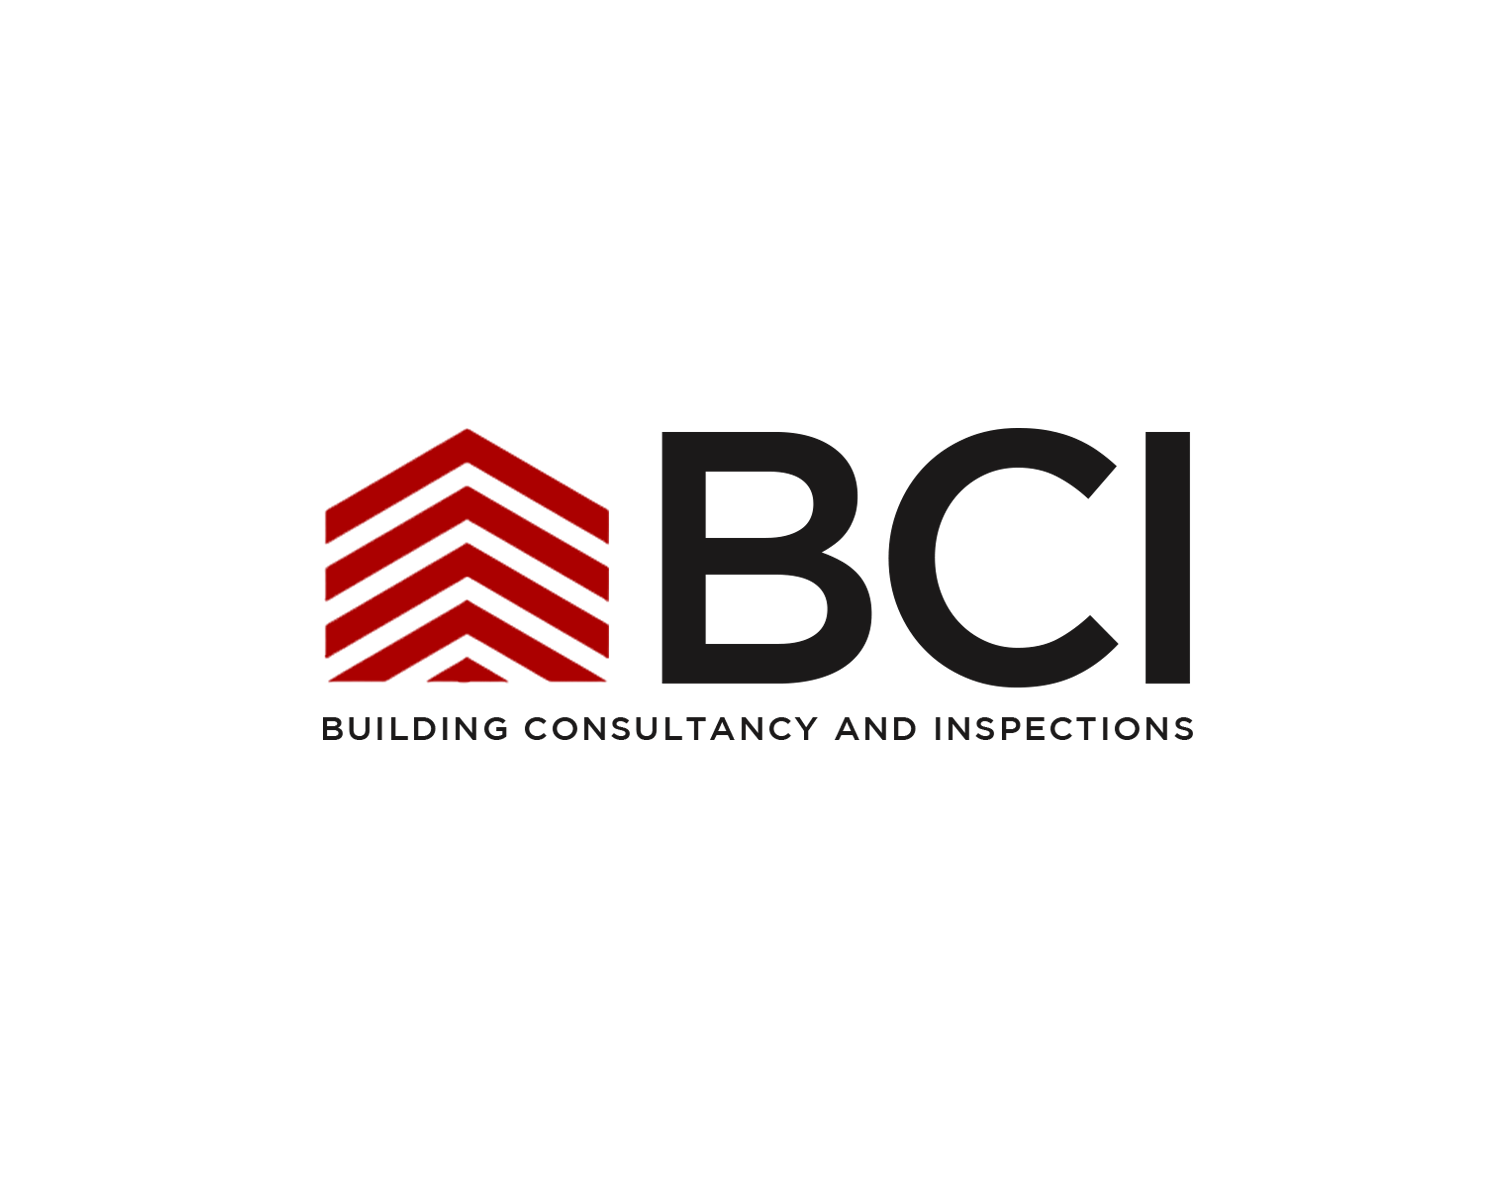 BCI Logo - Logo Design Contest for BCI: Building Consultancy and Inspections ...